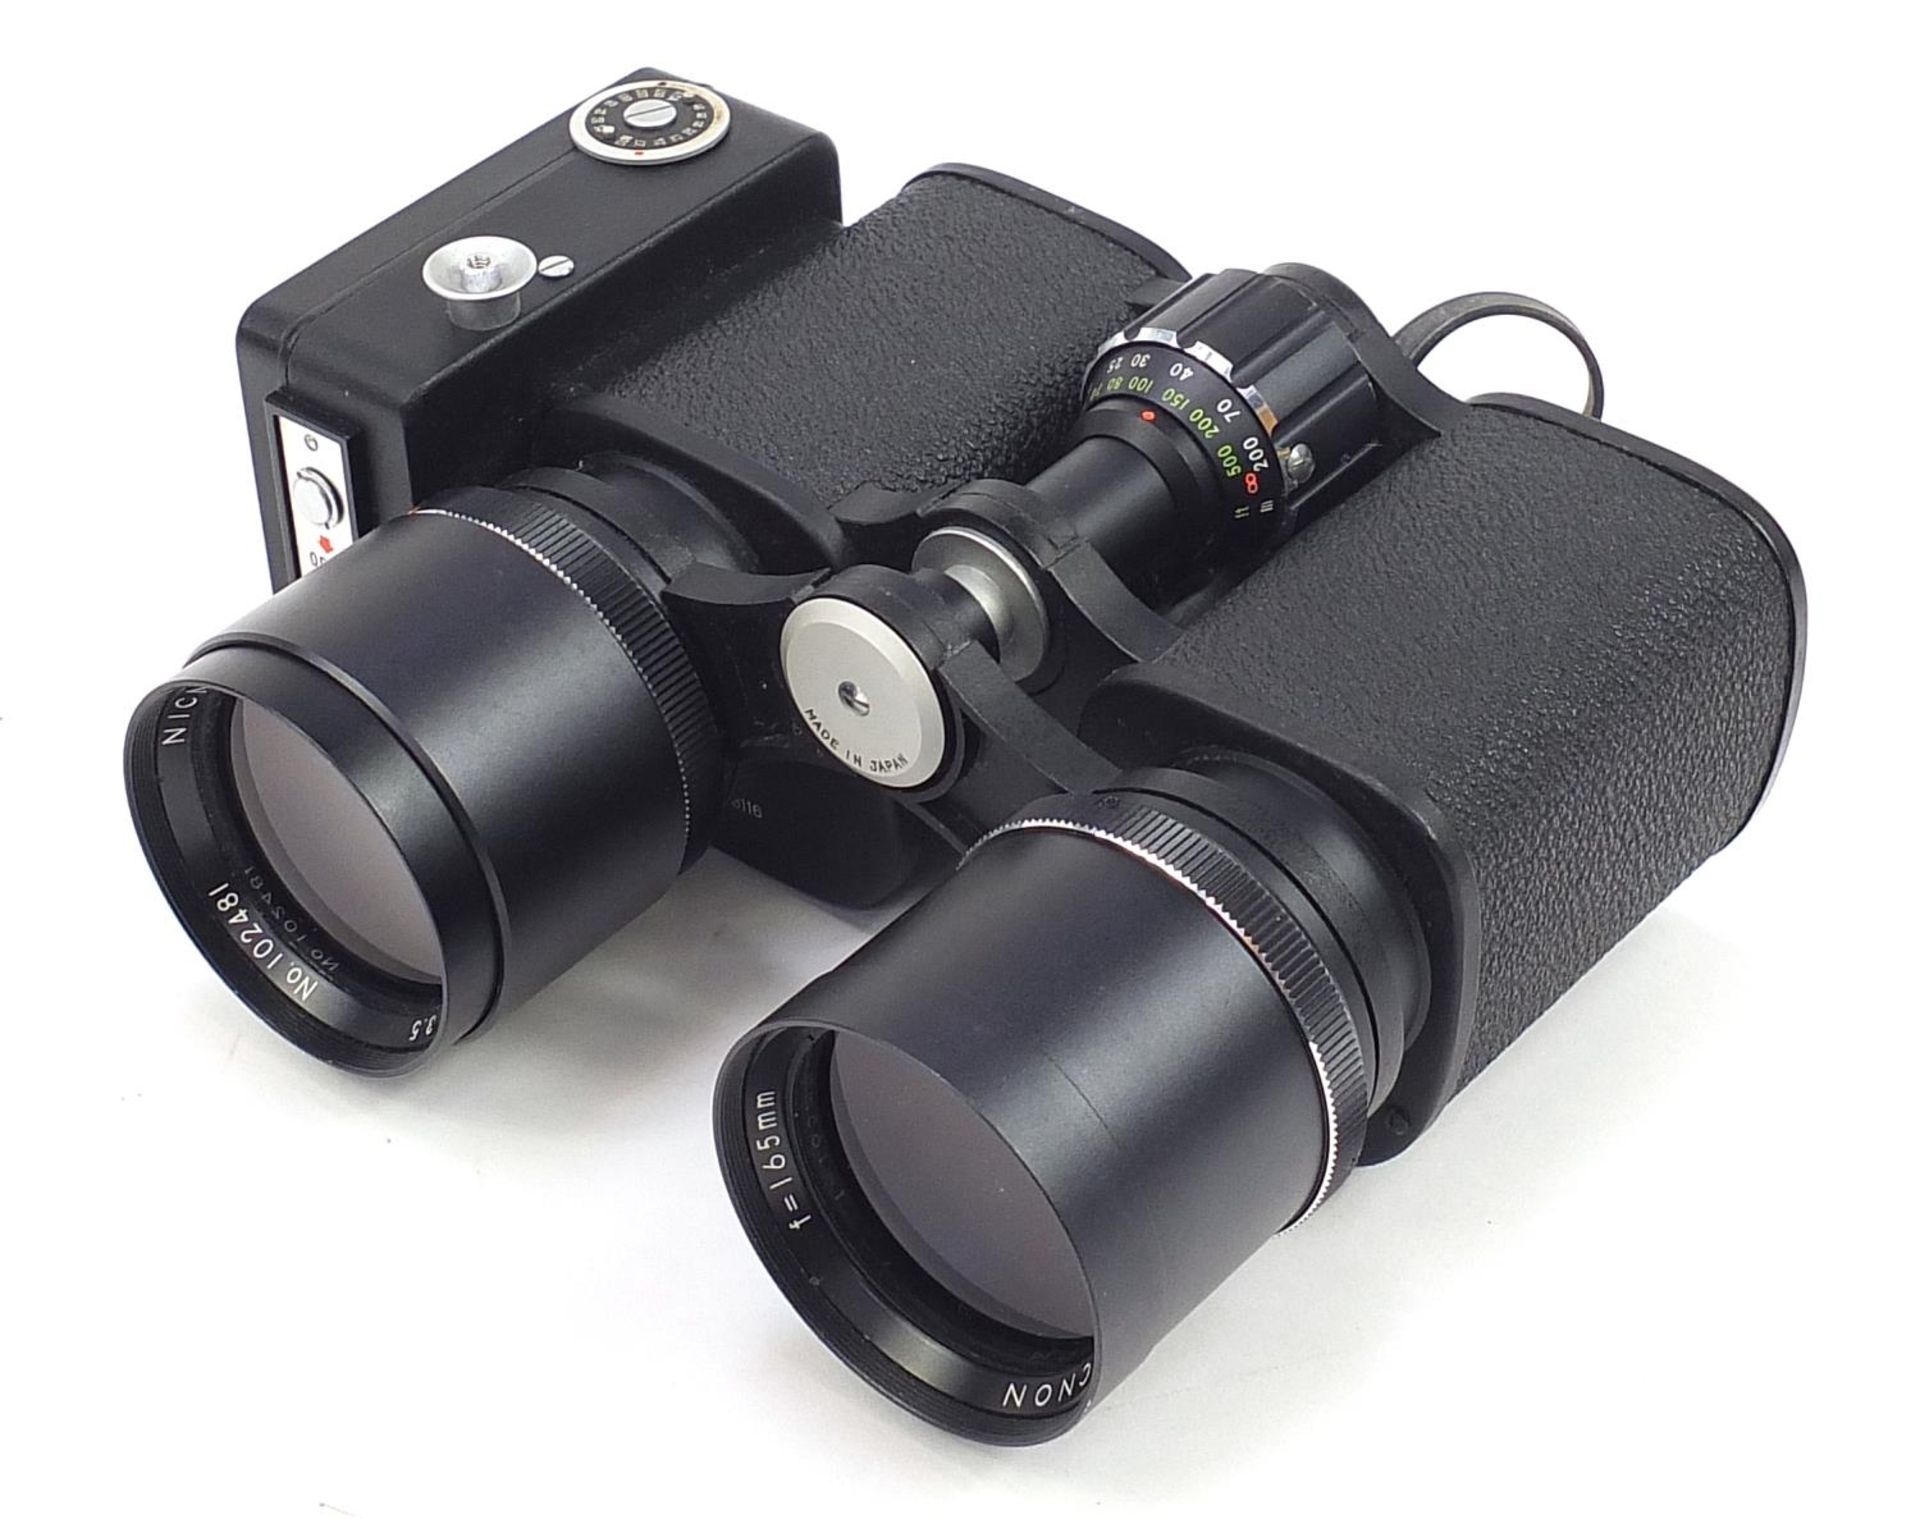 Nicnon TF7X50 combination binoculars and camera with protective case - Image 2 of 4